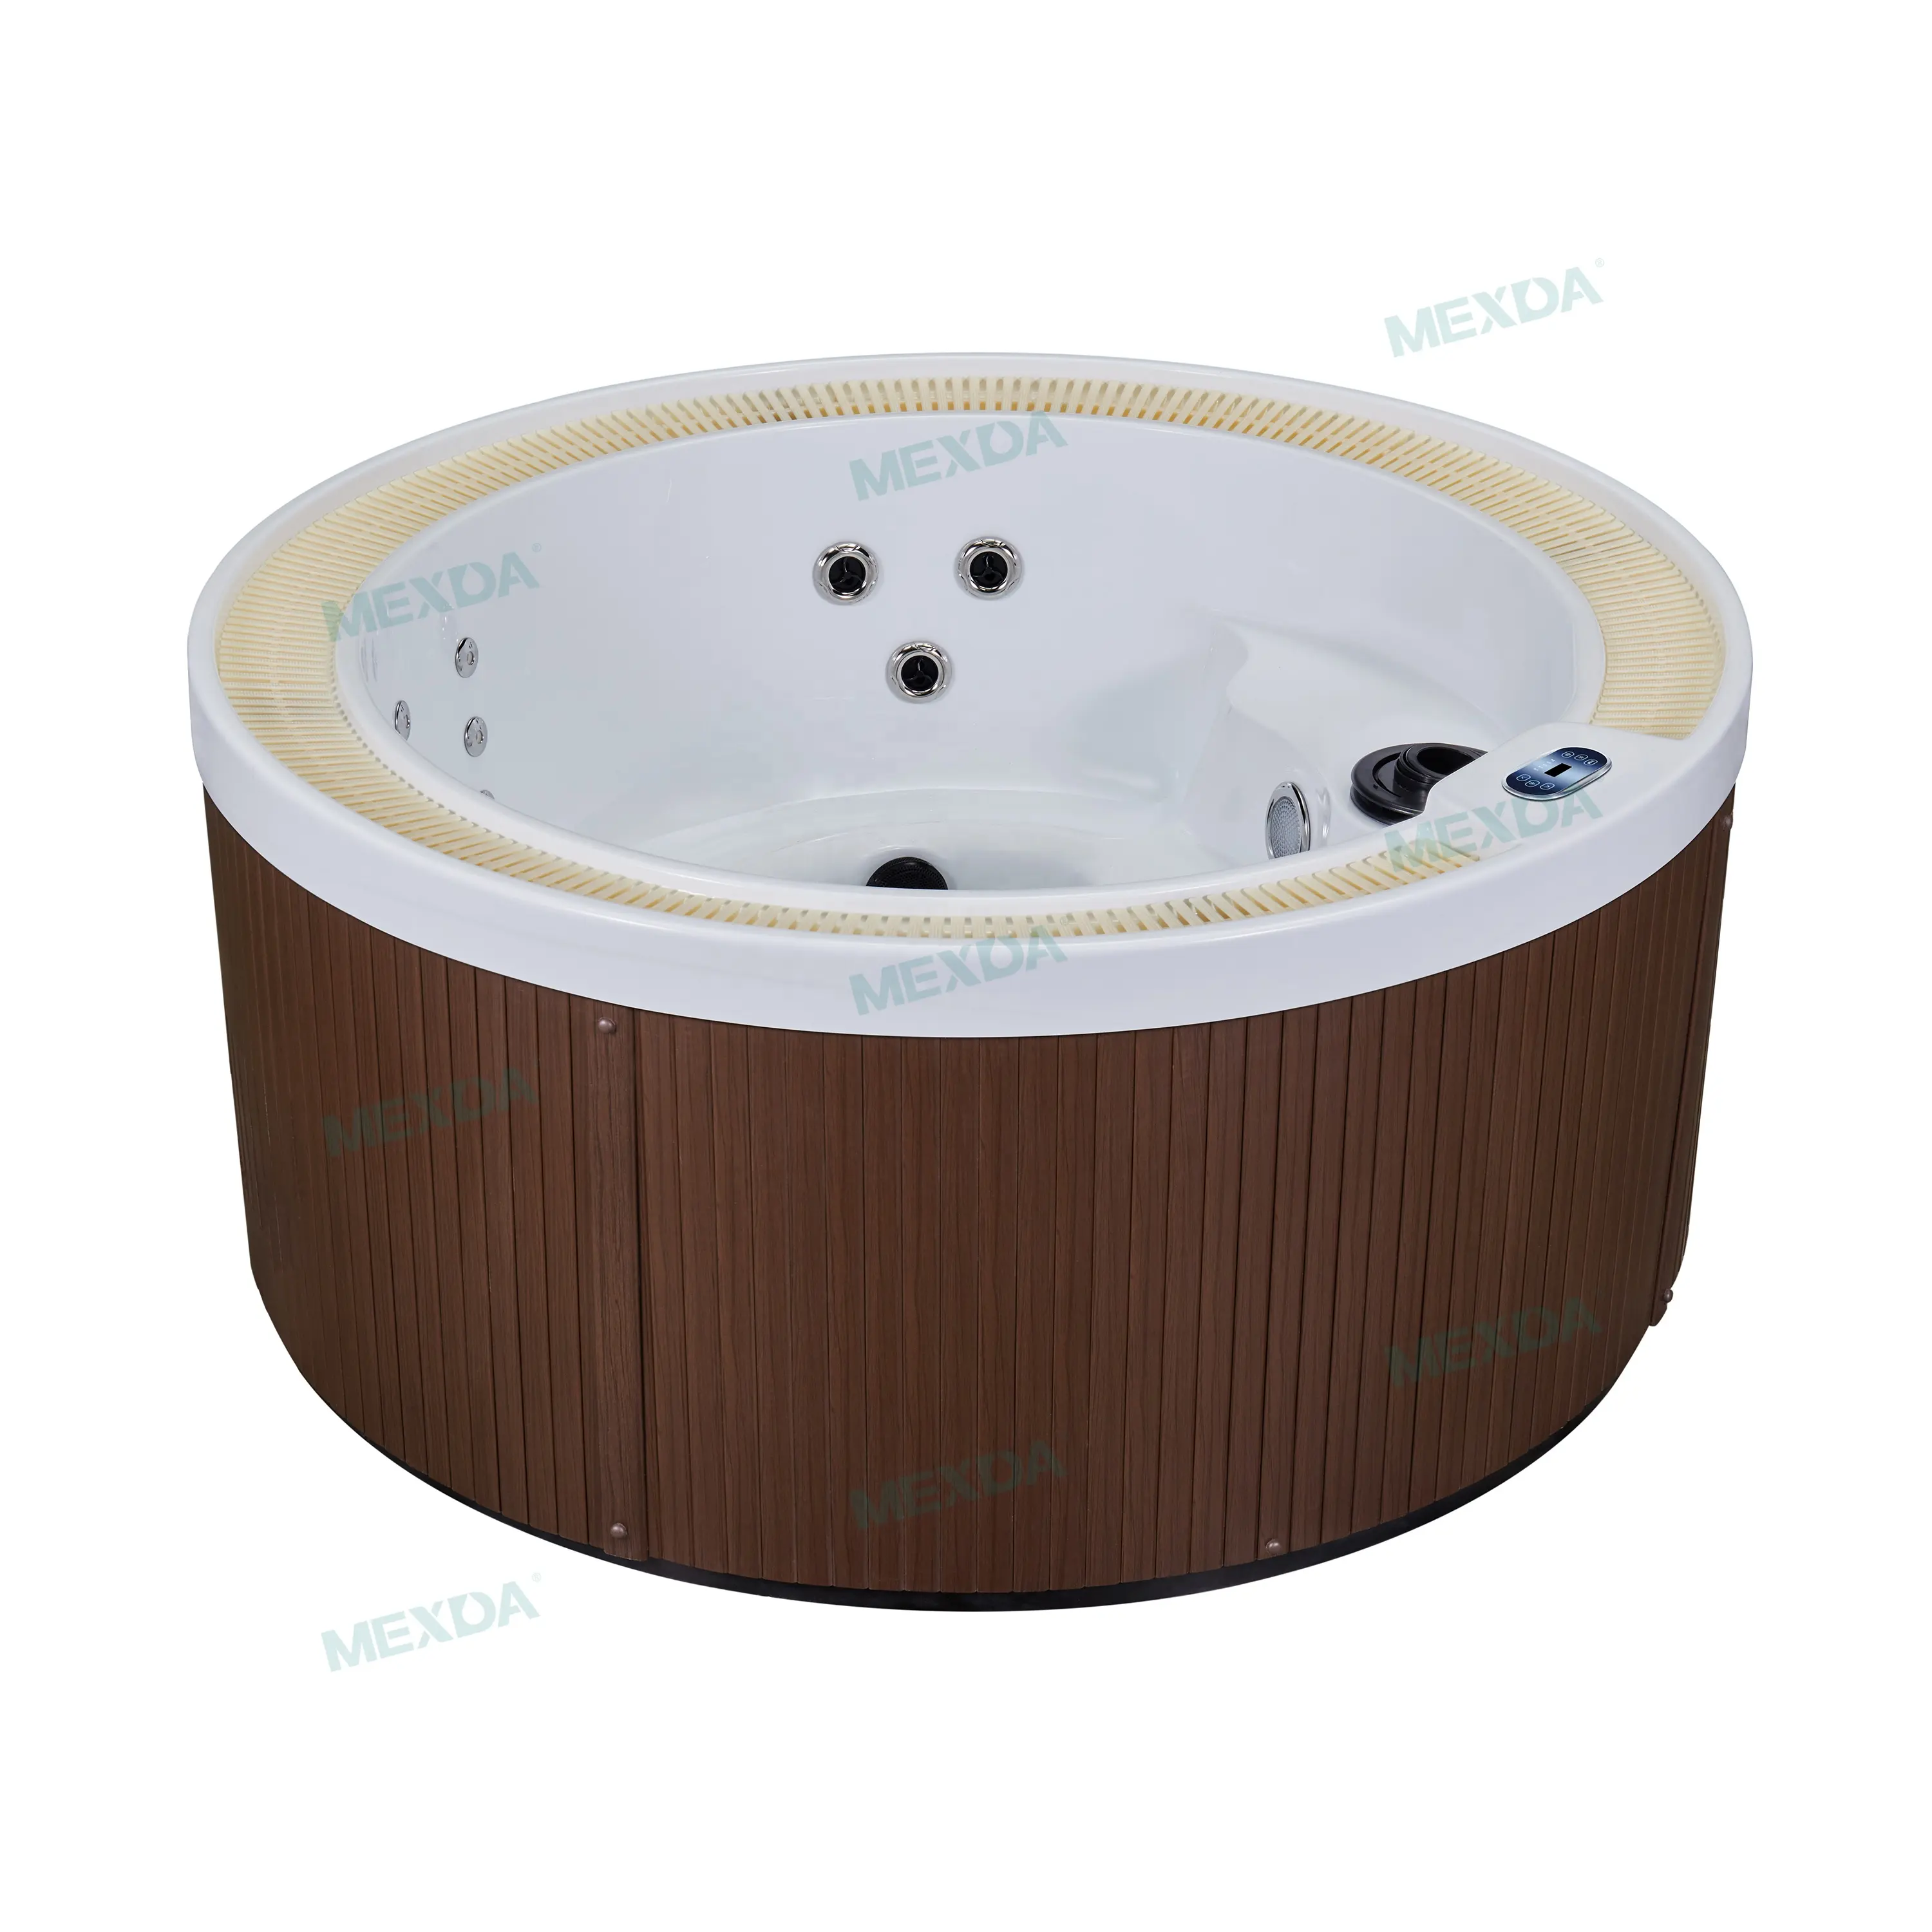 MEXDA hot sale round outdoor spa hot tub 4 person WS-096